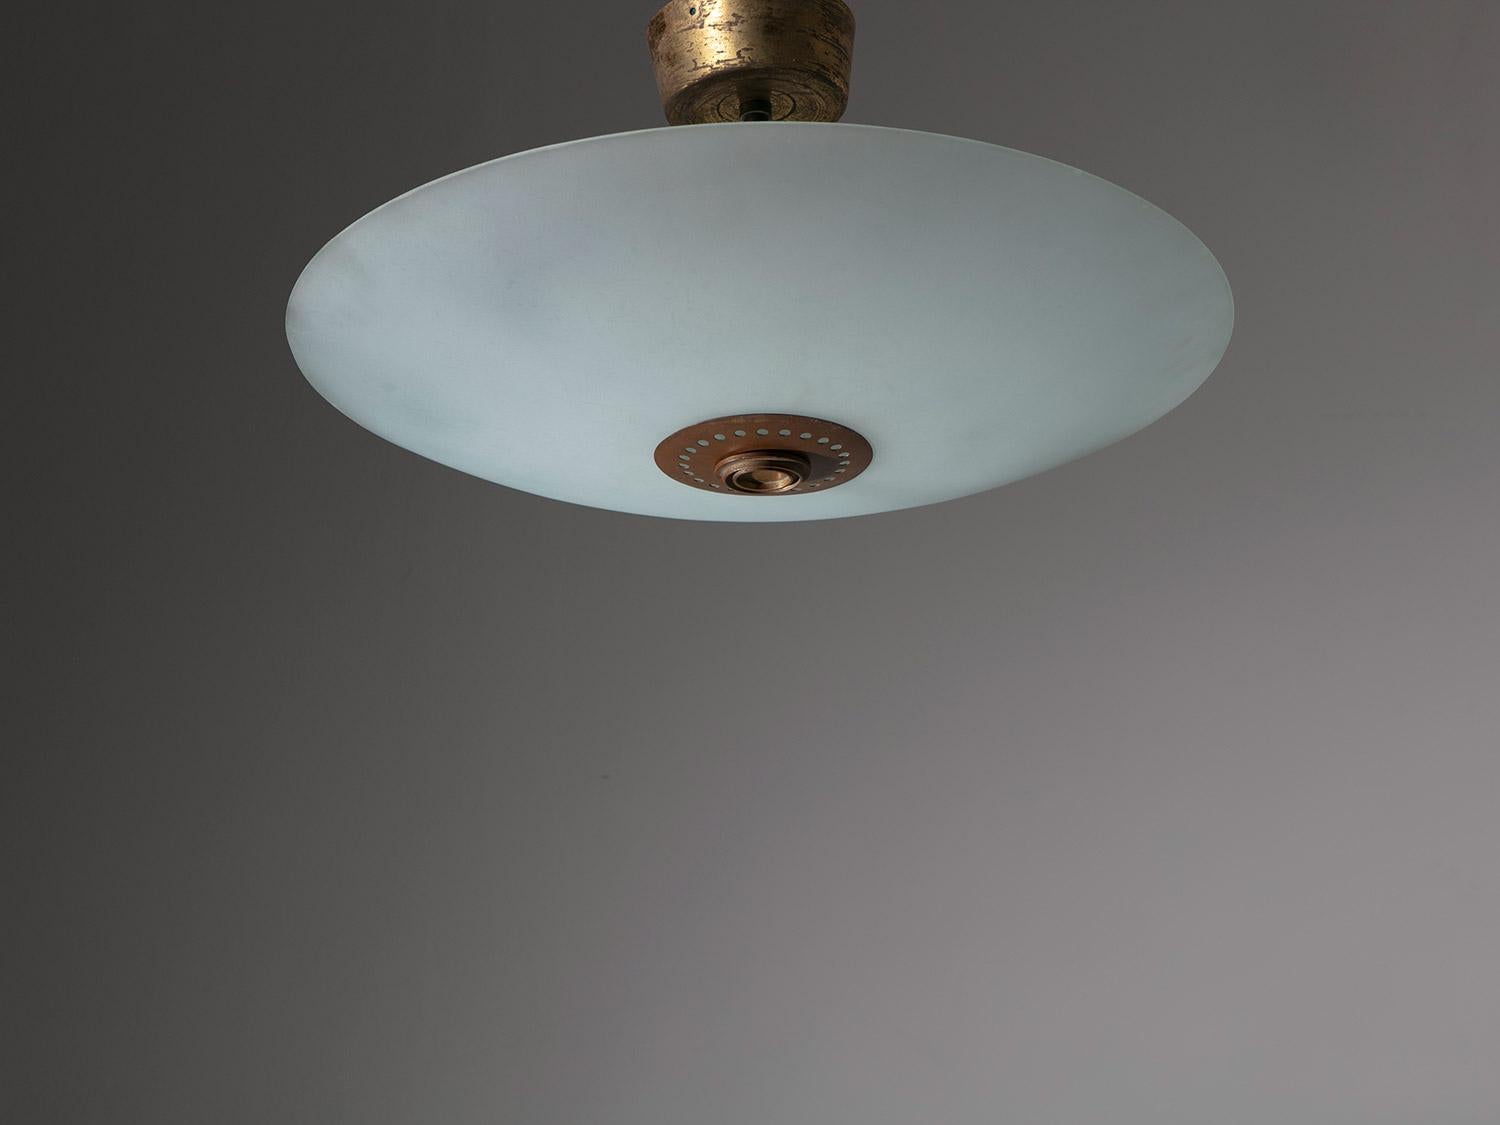 Large ceiling lamp attributed to Pietro Chiesa.
Sandblasted glass shade supported by brass frame.